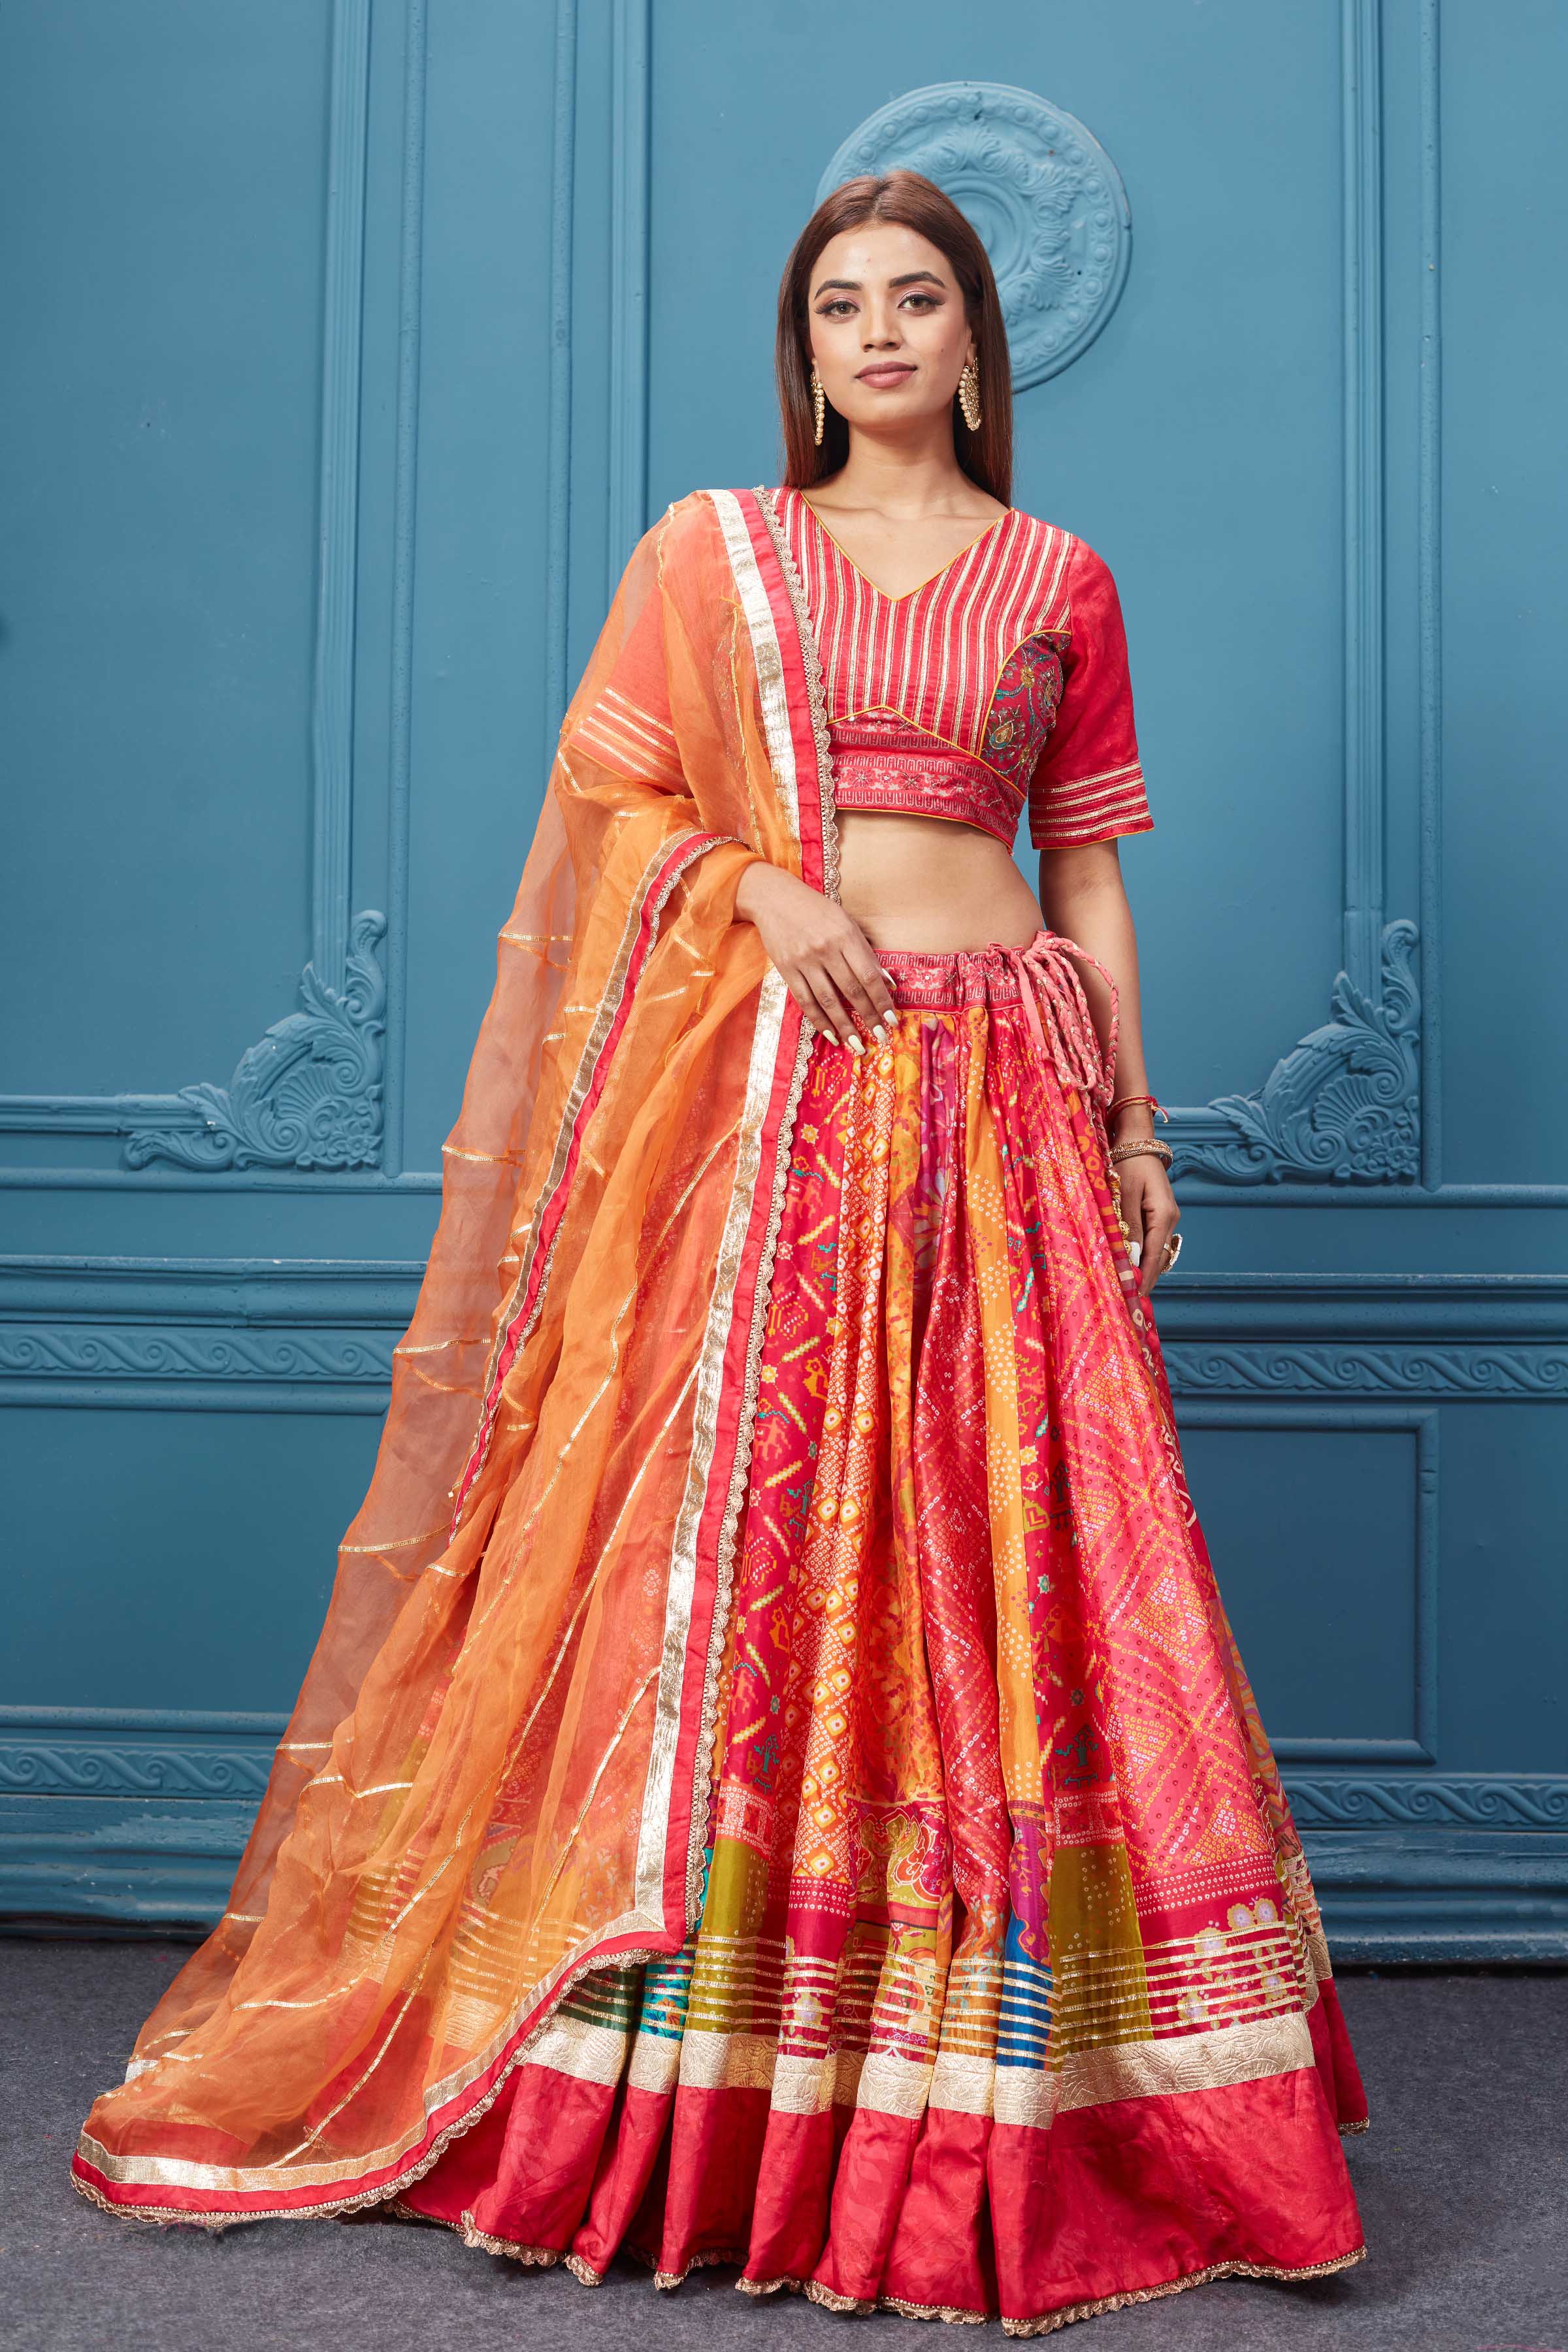 Buy this Red embroidered bandhej lehenga with a contrasting orange dupatta online in the USA. Featuring embroidered blouse with 3/4th sleeves blouse The Lehenga comes with a look royal at weddings and festive occasions in exquisite designer sarees, gowns, lehngas, Anarkali, and suits Pure Elegance Indian saree stores in the USA.